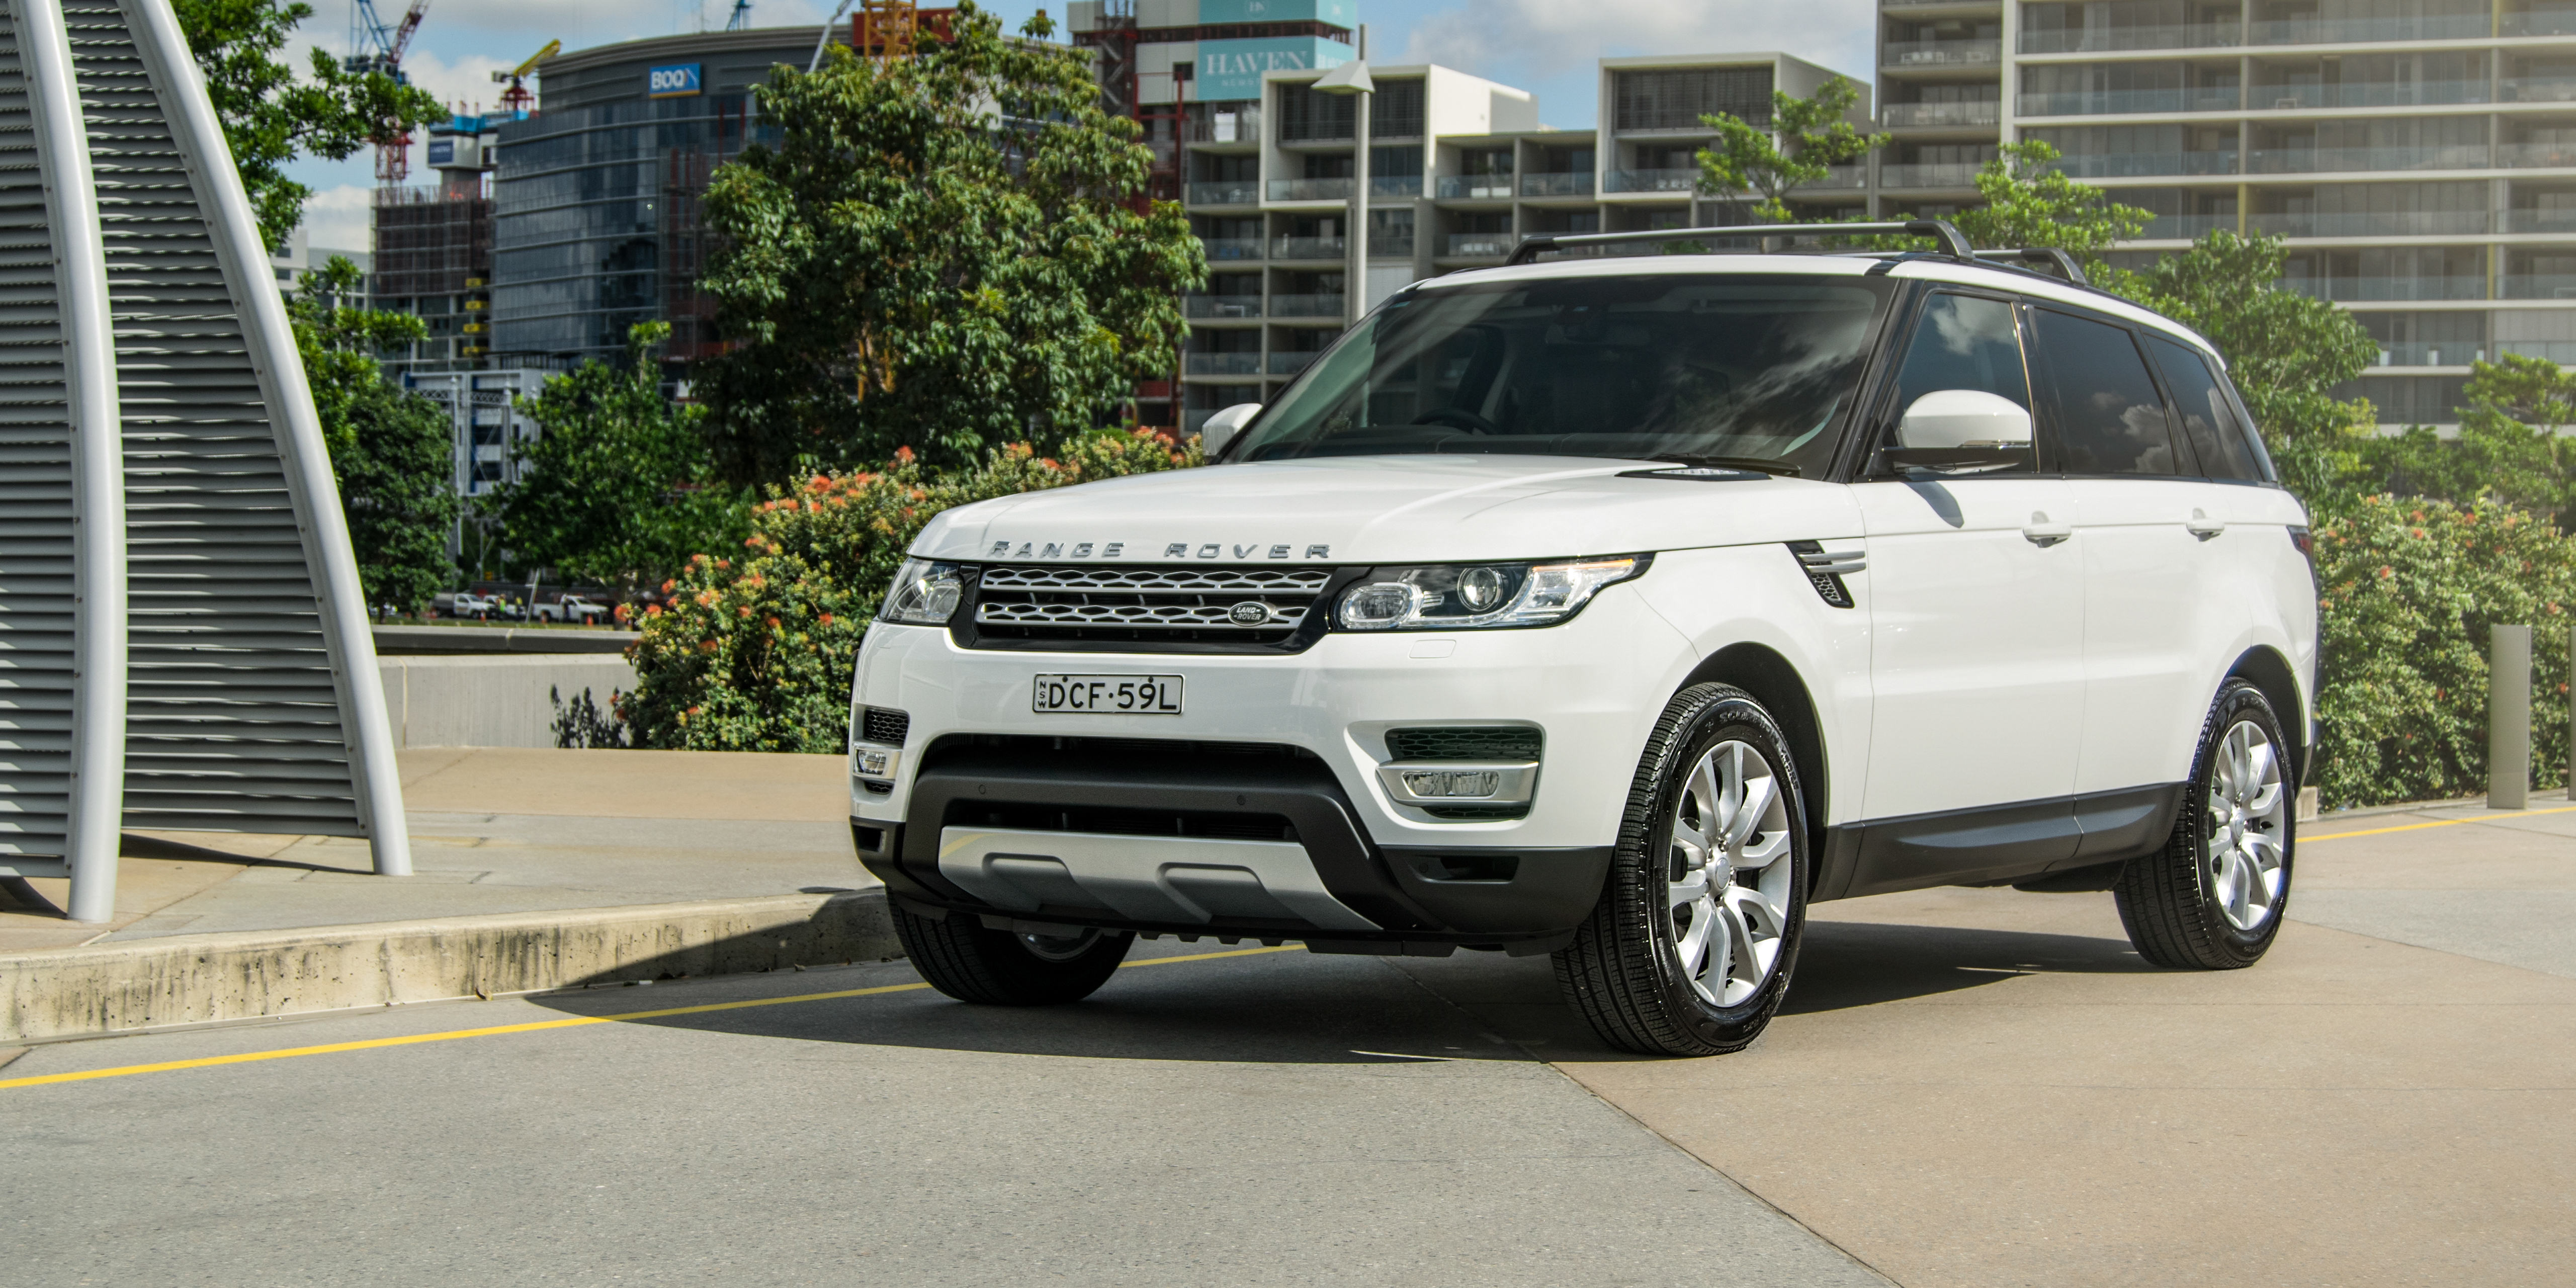 Land Rover Range Rover Sport exterior restyling